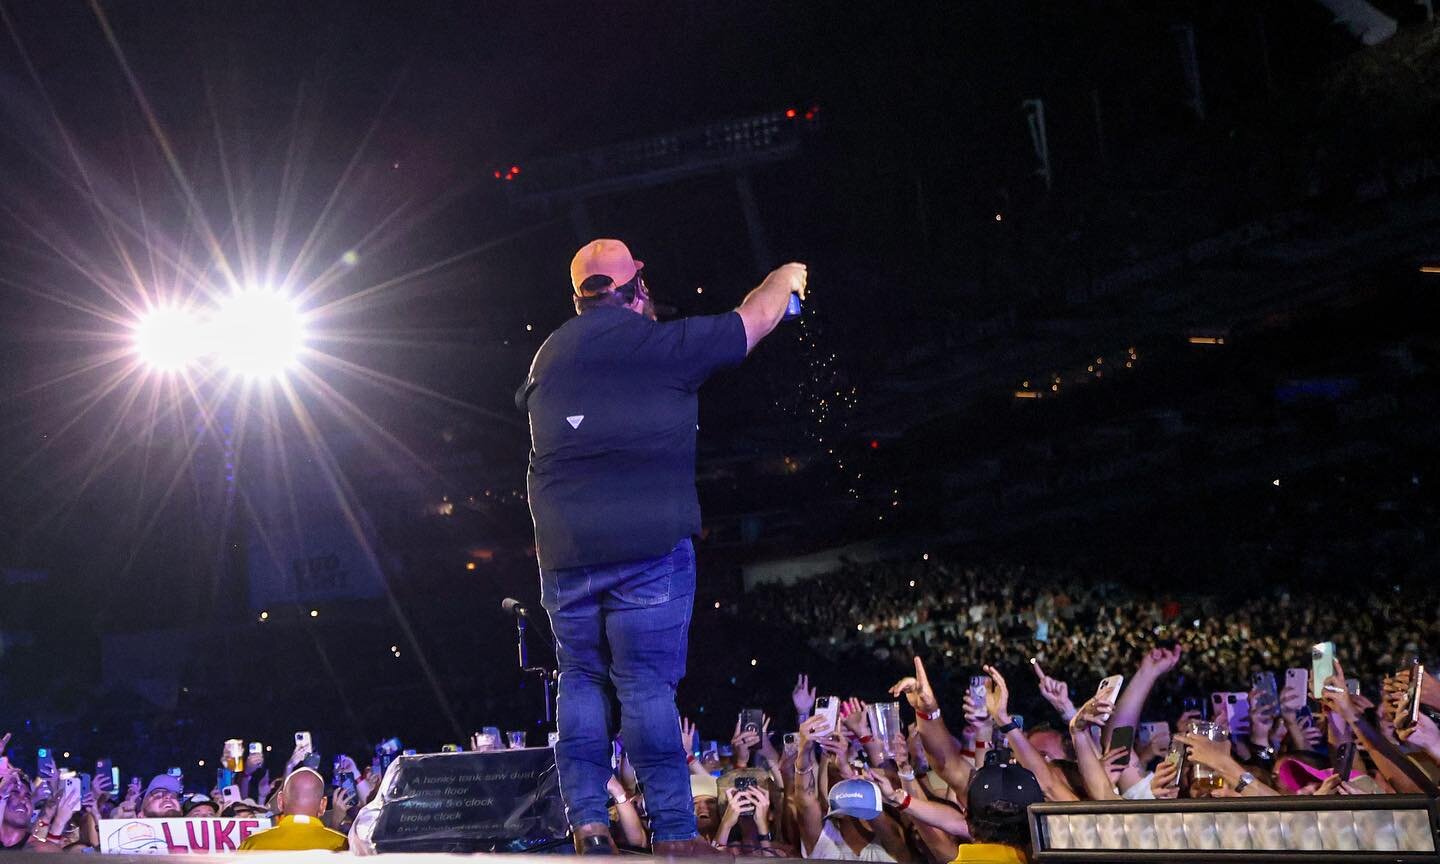 Luke Combs concert in Tampa. Front Rows are in the Splash 💦 Zone. @lukecombs @davidbergman @canonusa #lukecombs #countrymusic #country #music #singing #concert #soldout #flare #starburst #spill #splash #rumcoke #drink #spill #canon#concertphotograph